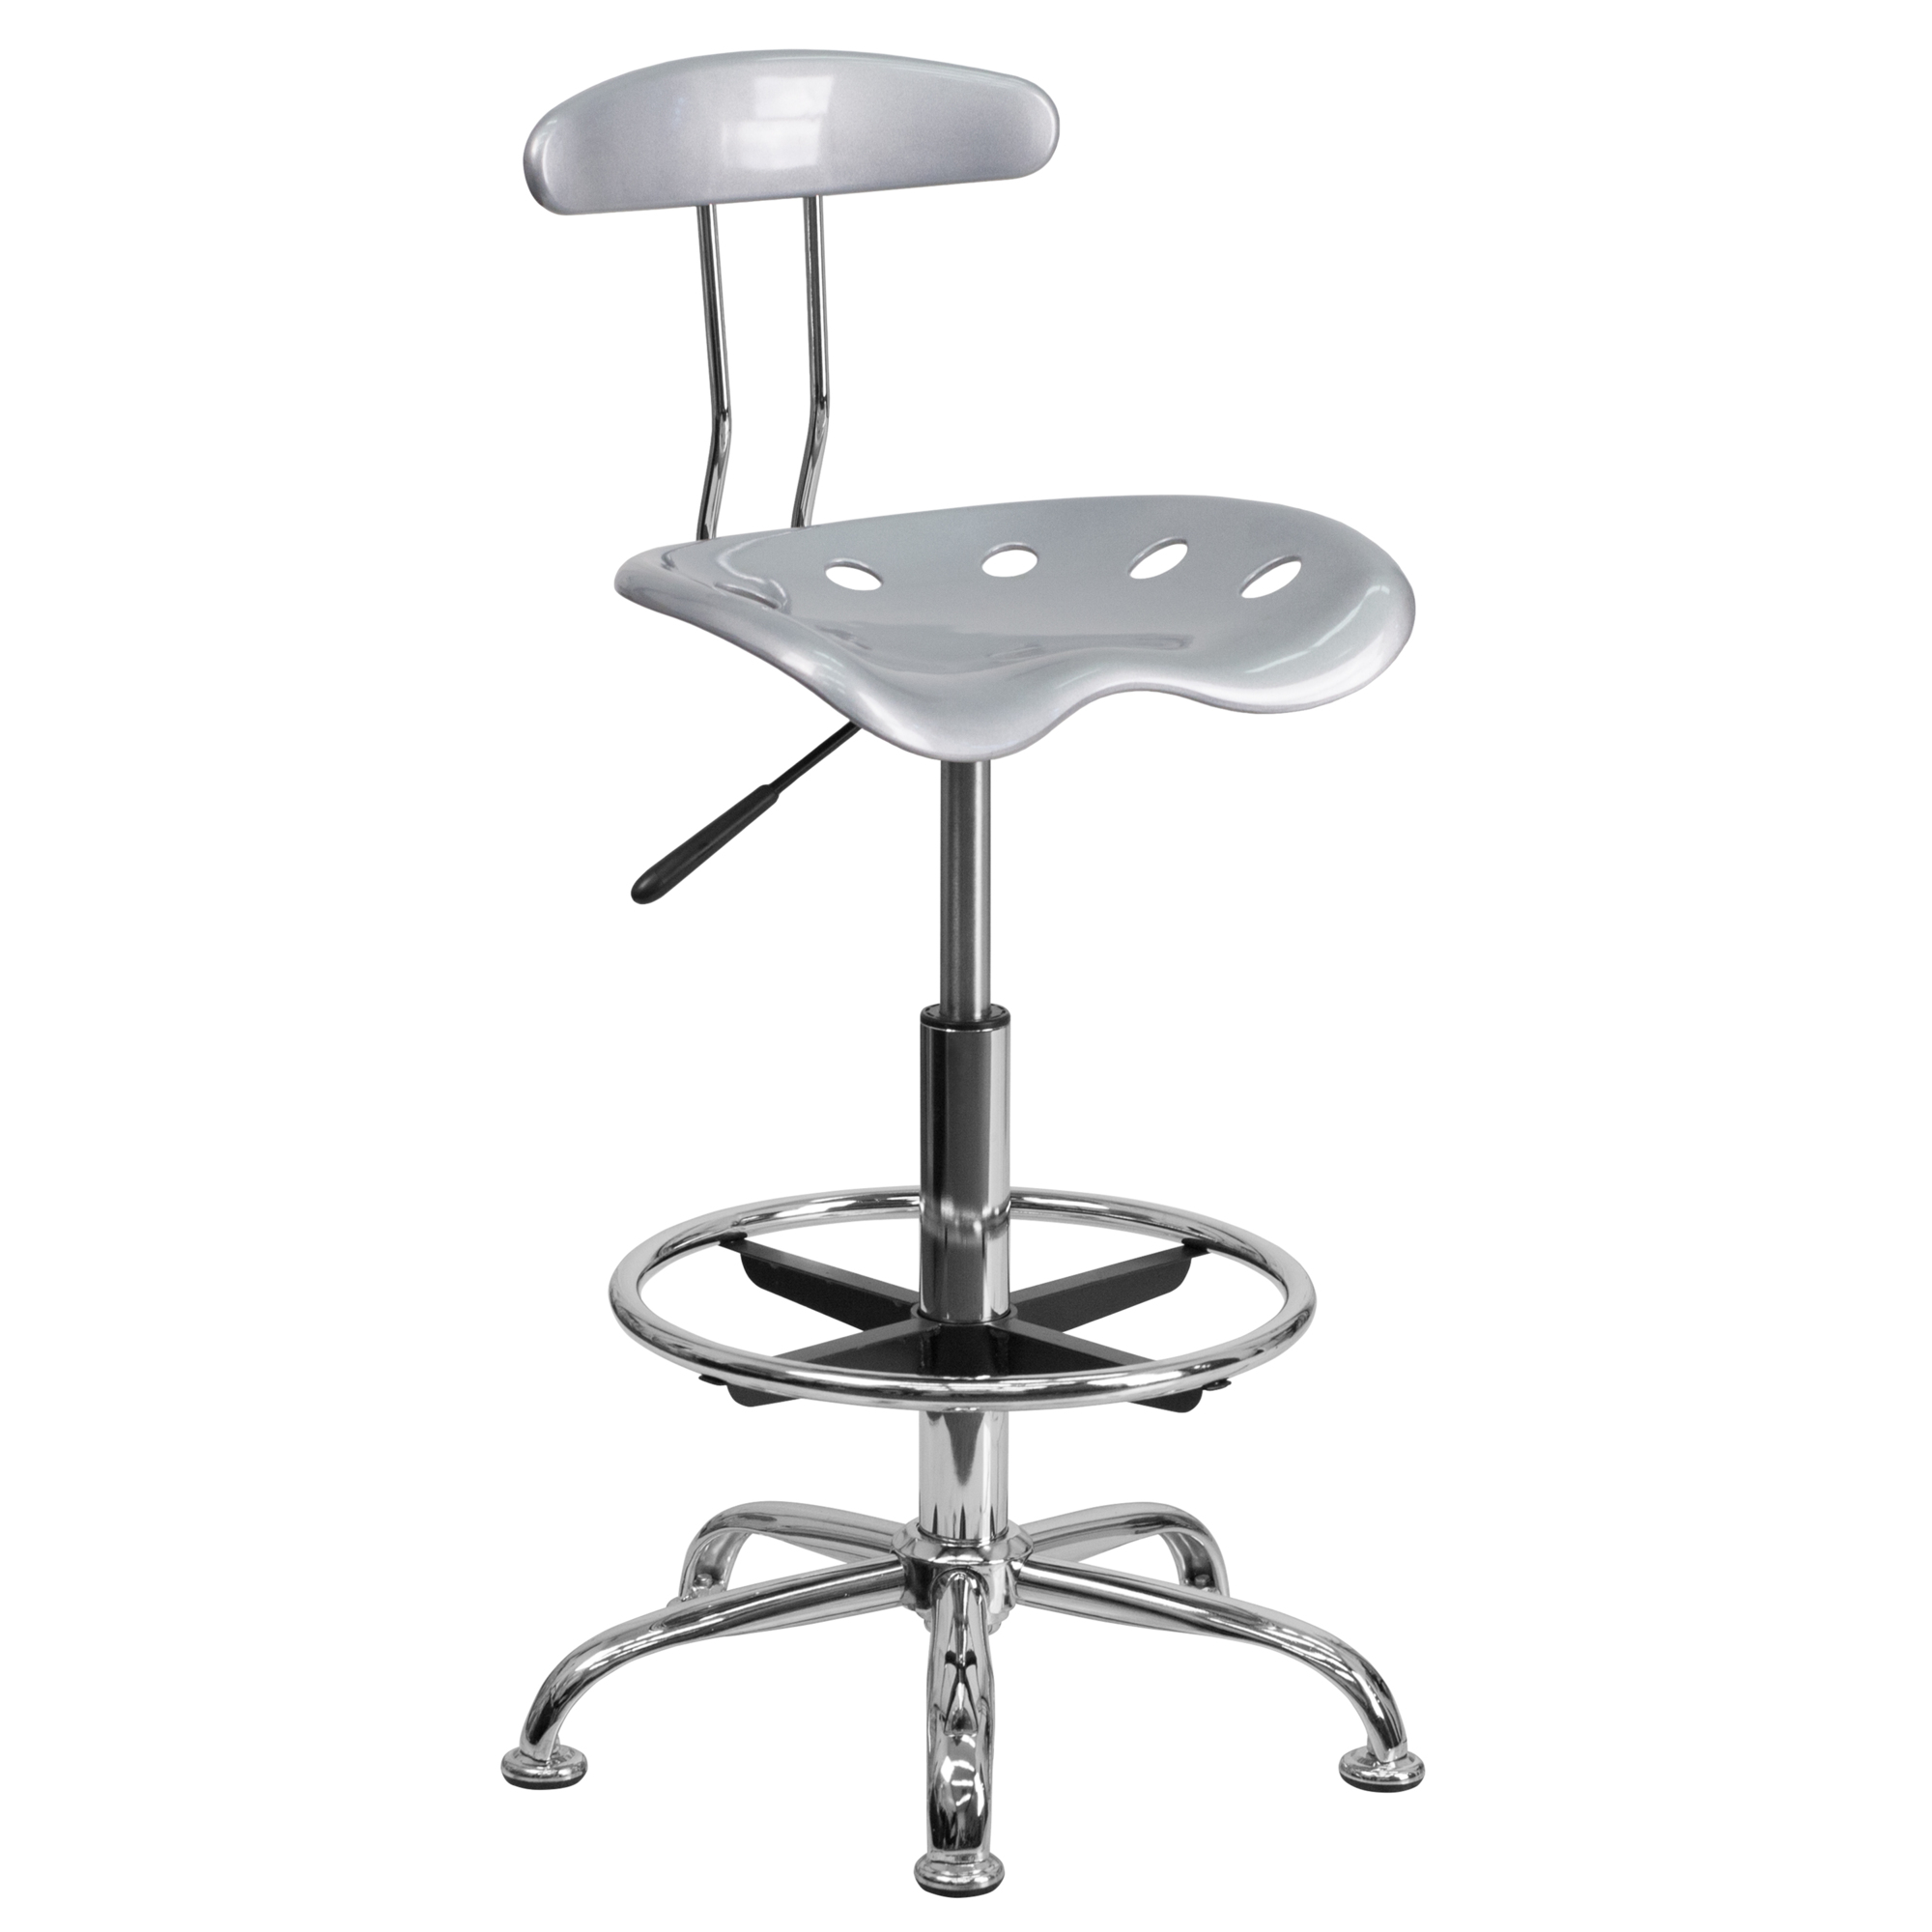 Flash Furniture, Vibrant Silver and Chrome Drafting Stool, Primary Color Gray, Included (qty.) 1, Model LF215SILVER